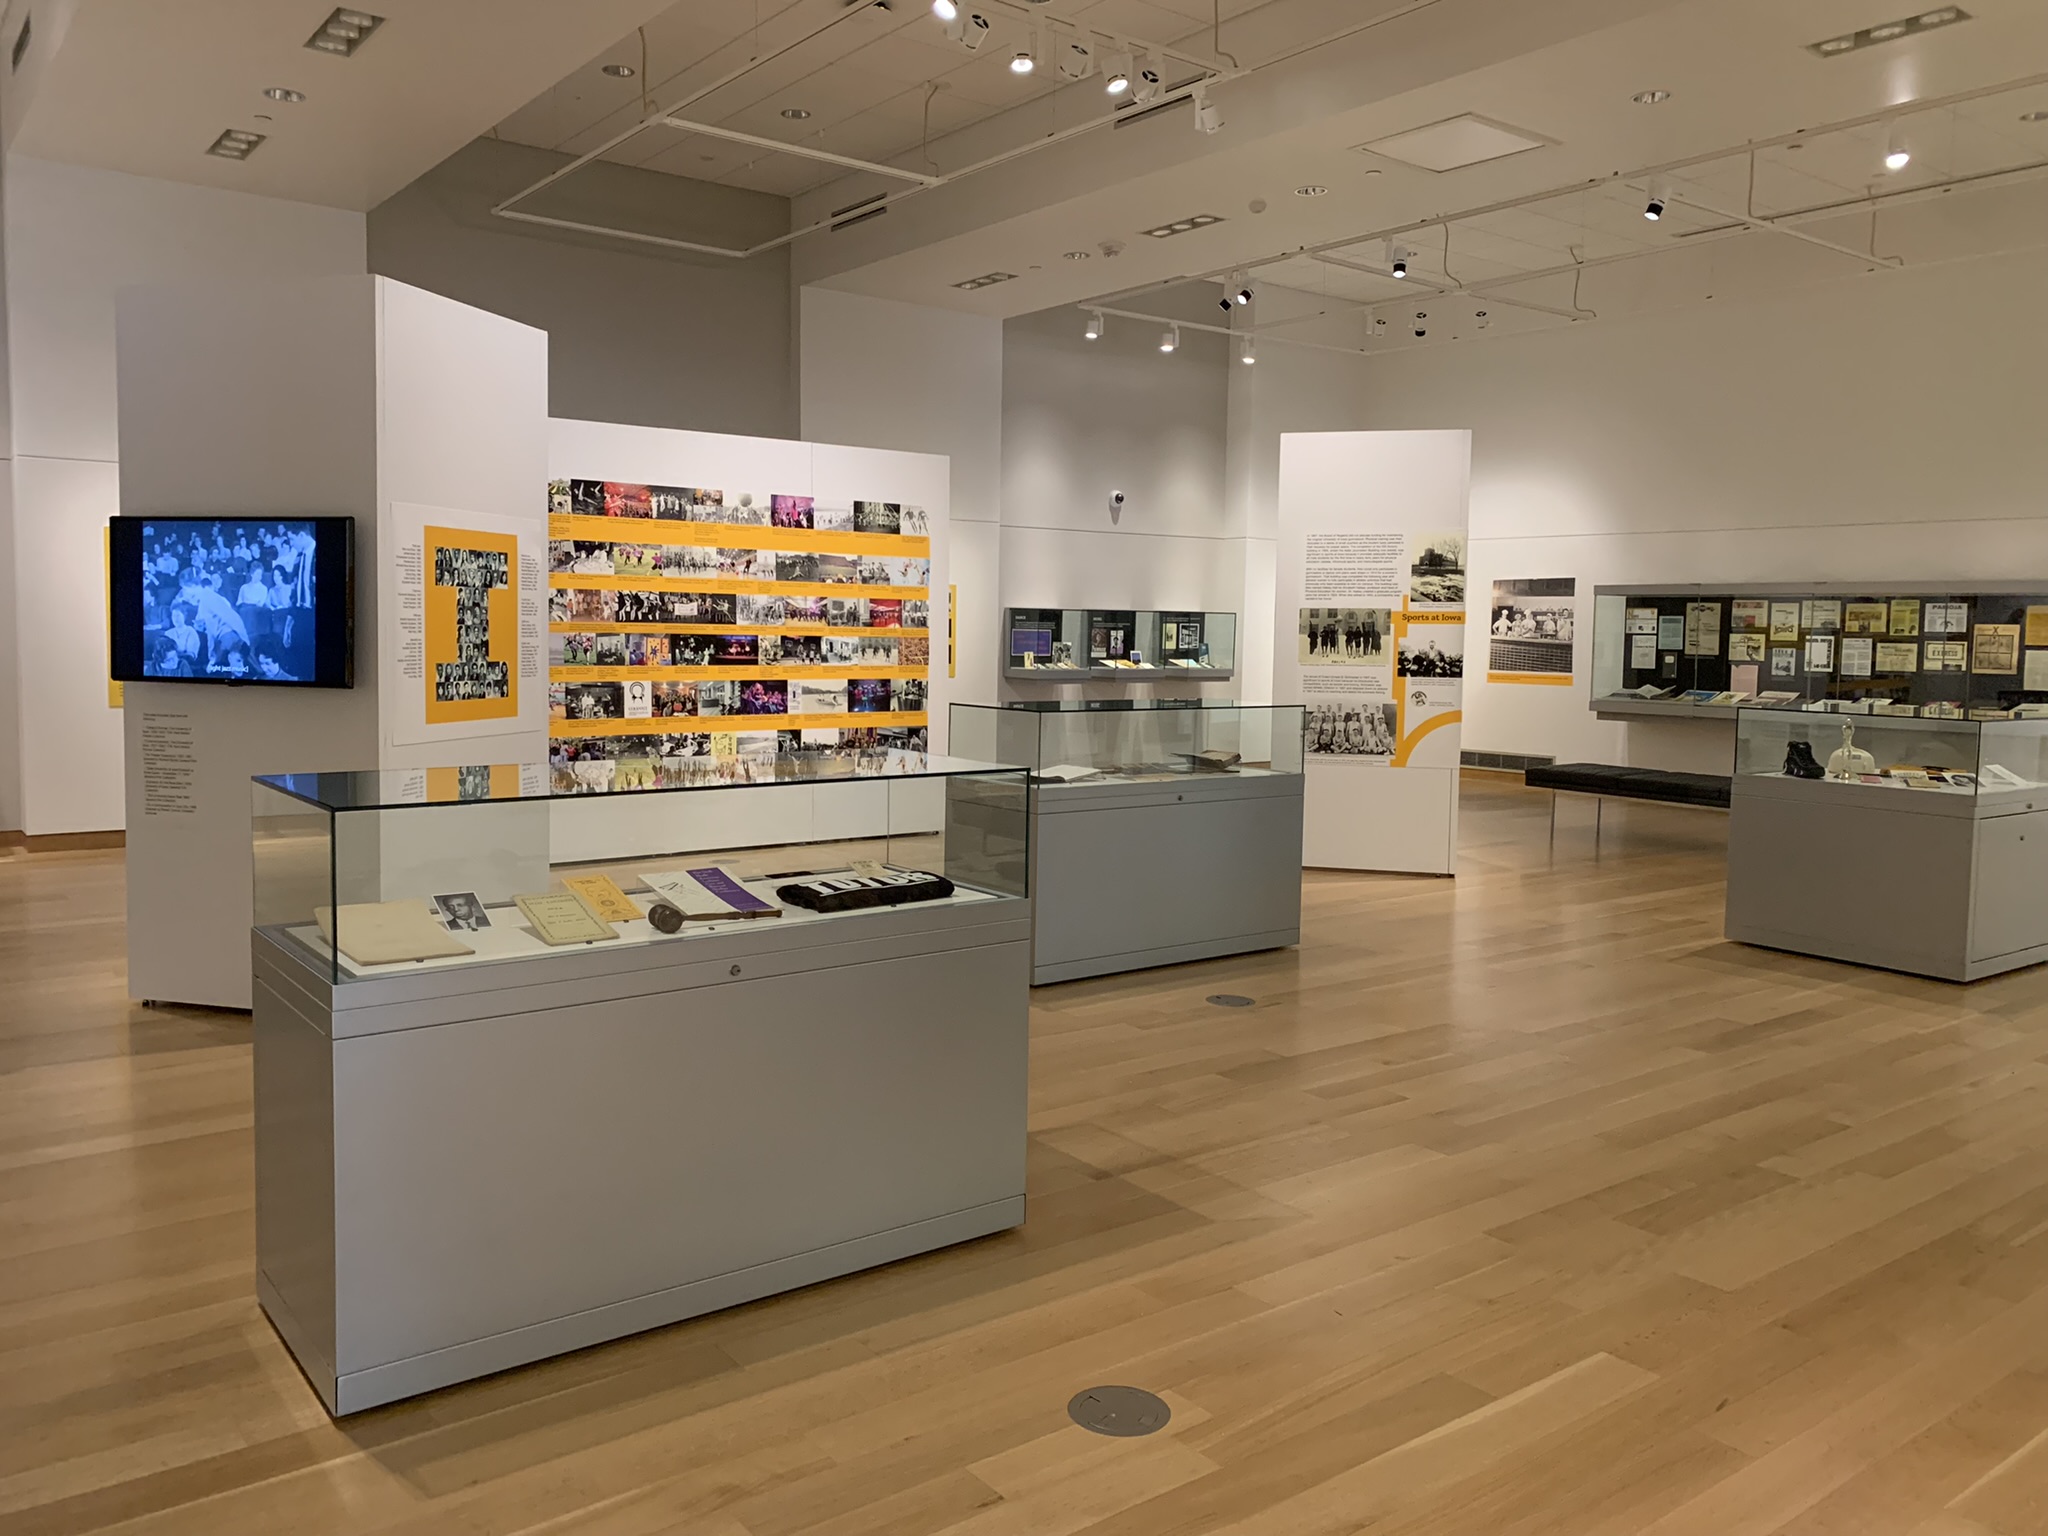 A broad view of the exhibit in the Main Library Gallery. Display cases are seen at a distance.